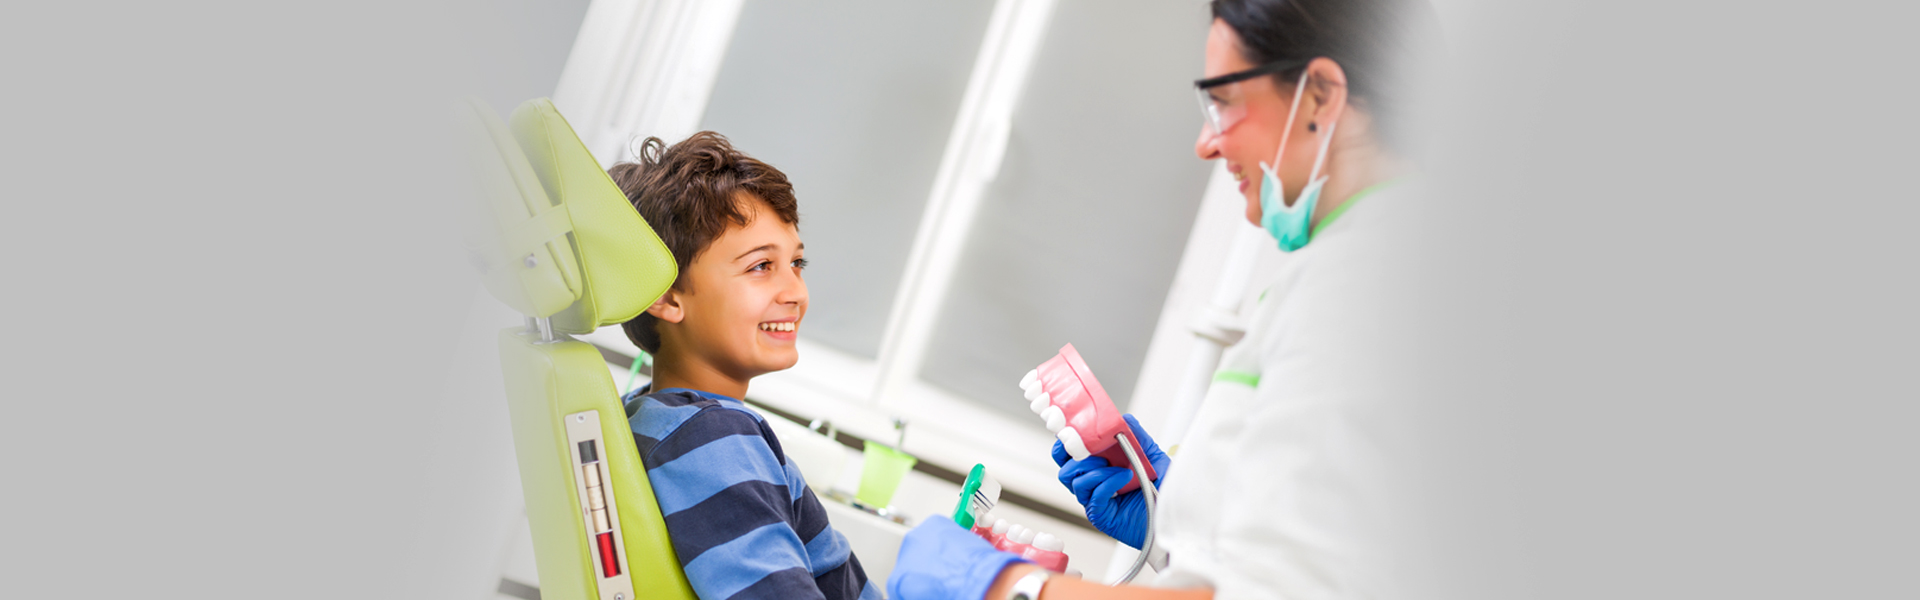 What Are Your Options When Your Child Loses a Permanent Tooth?